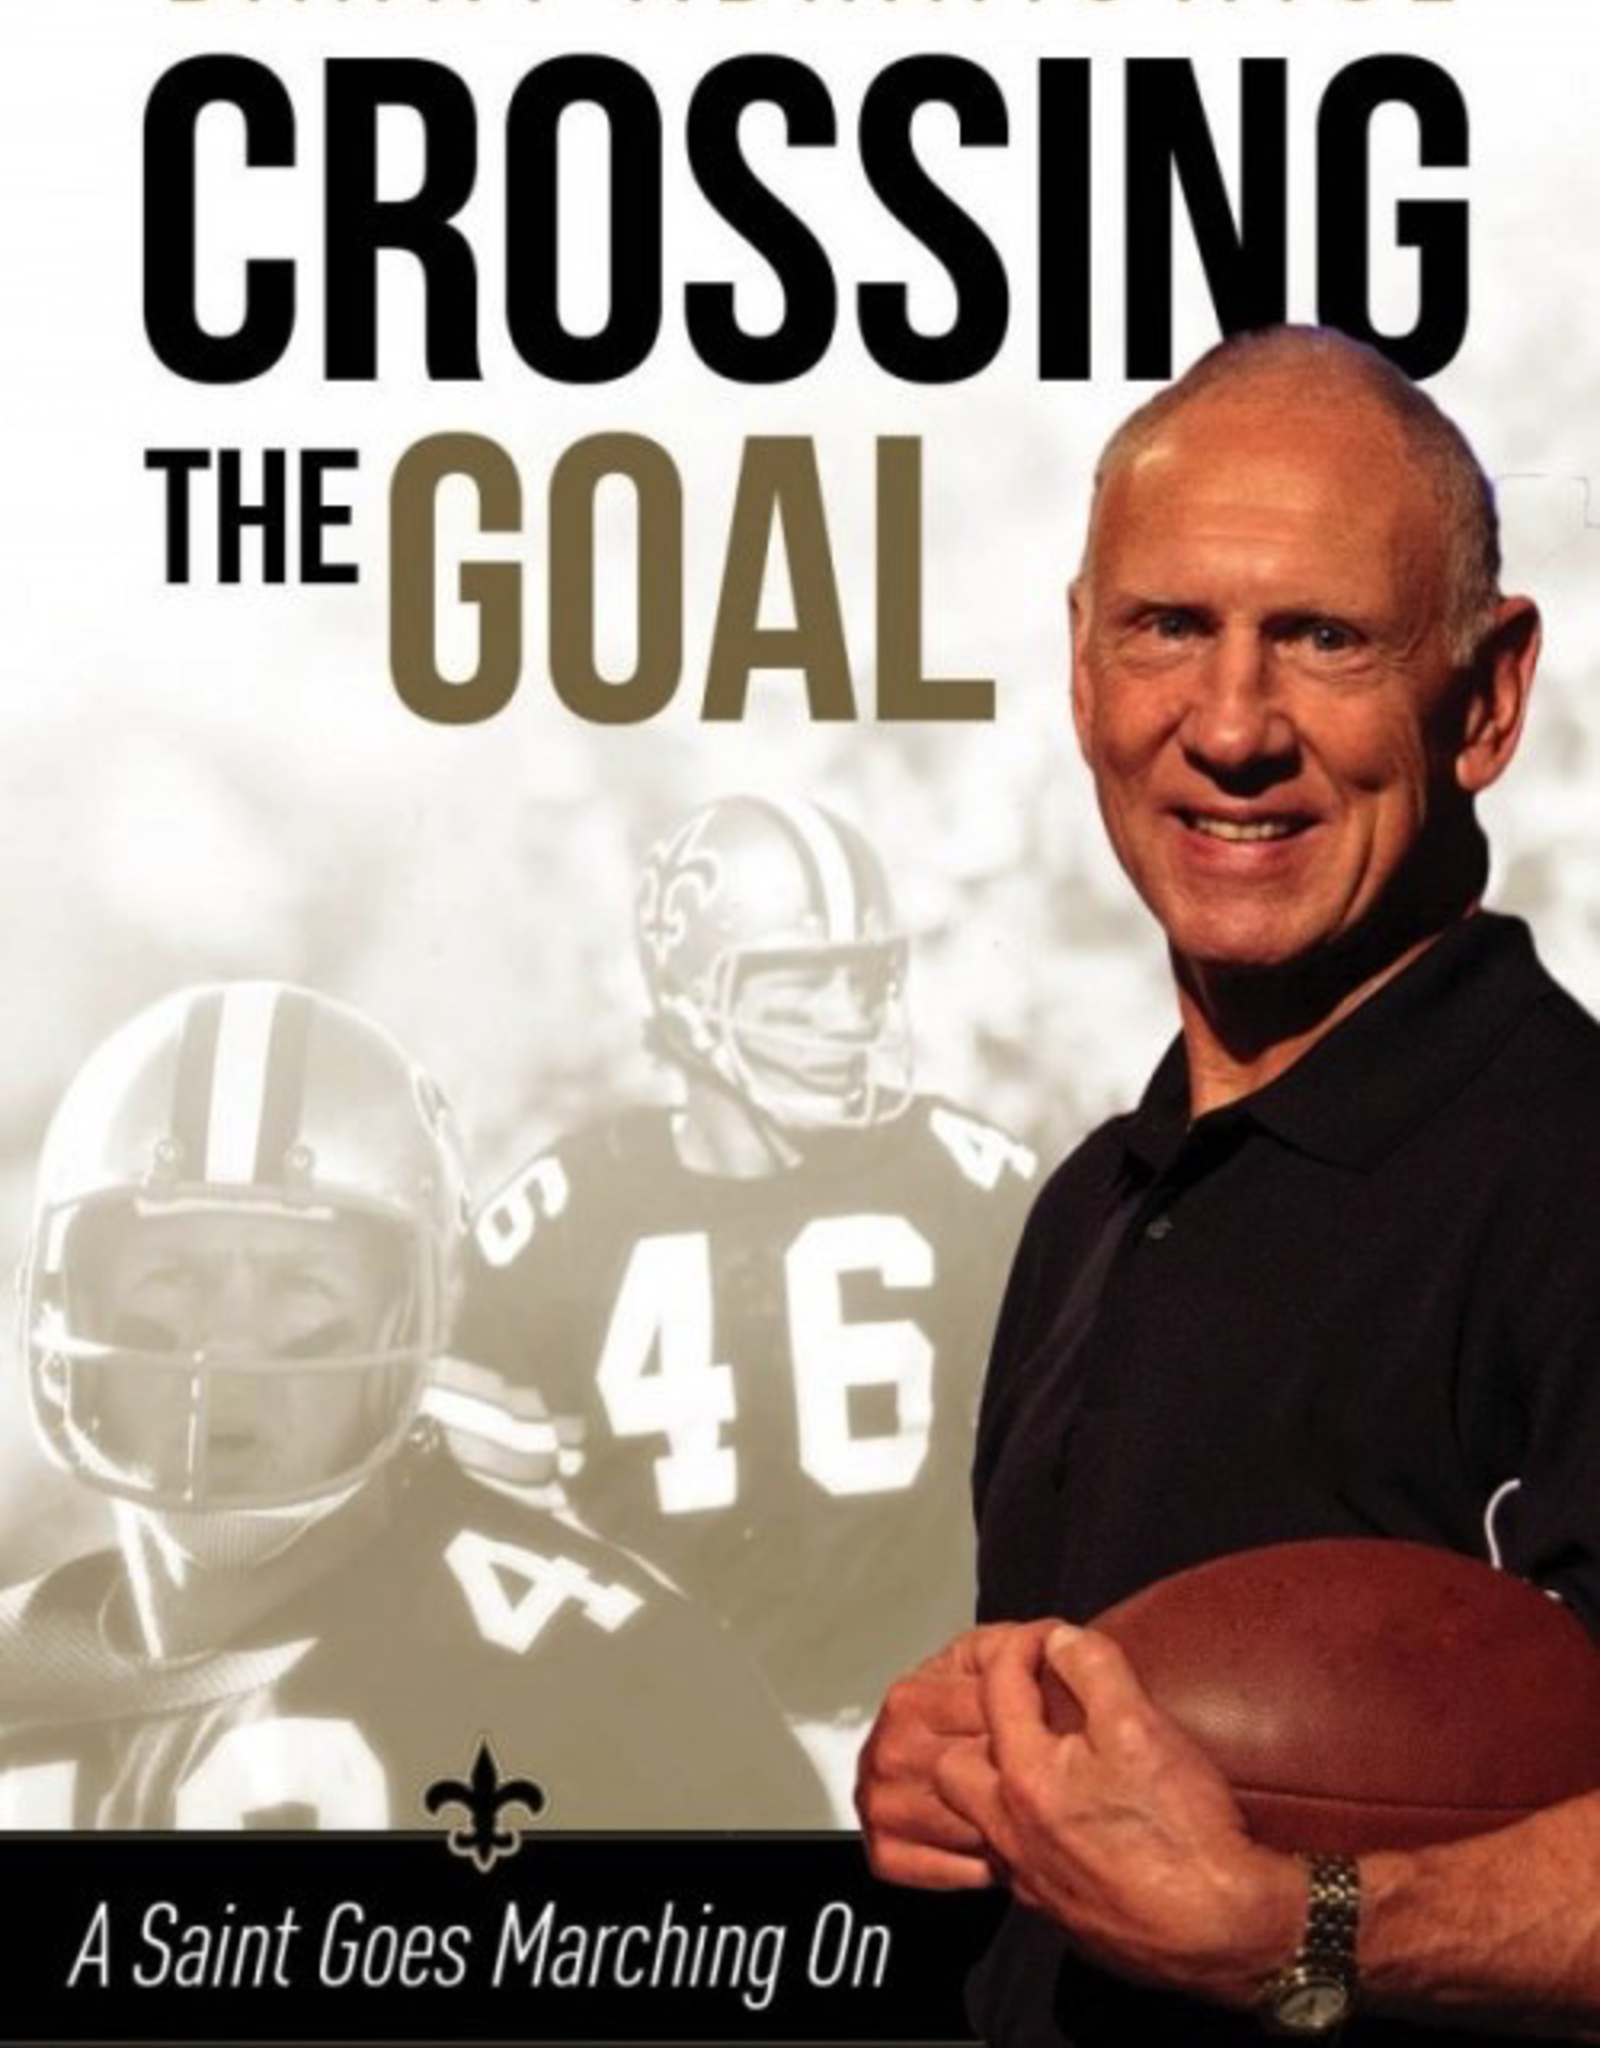 Sophia Institute Crossing the Goal:  A Saiont Goes Marching On, by Danny Abramowicz (paperback)